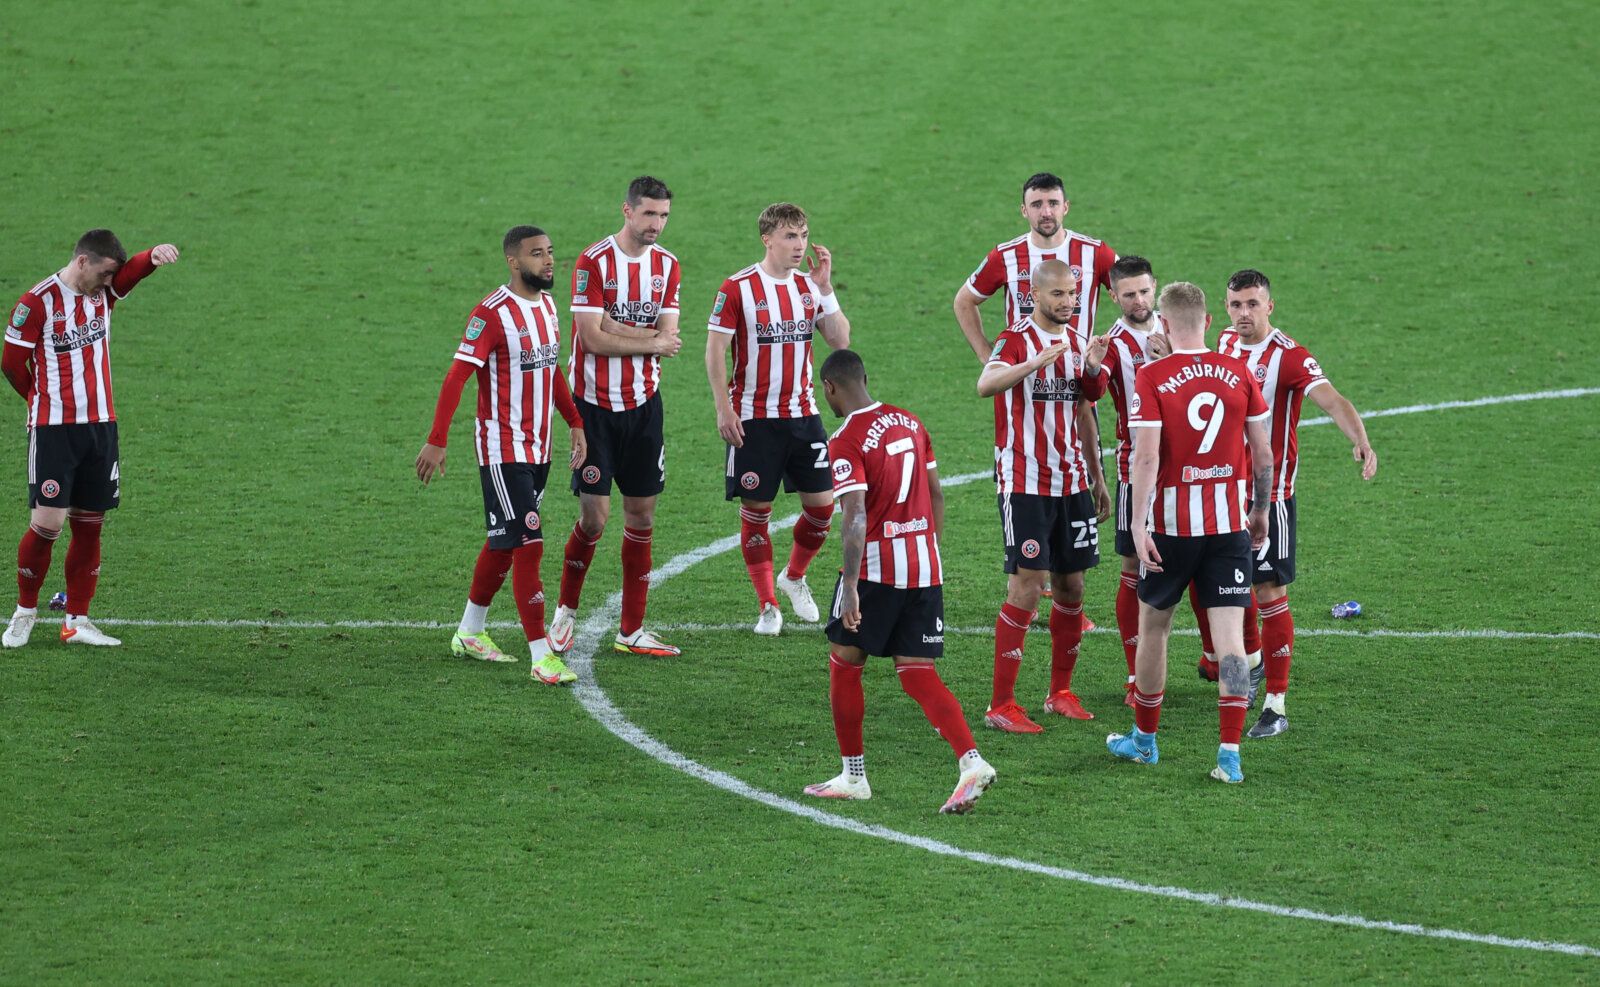 Soccer Football - Carabao Cup - Third Round - Sheffield United v Southampton - Bramall Lane, Sheffield, Britain - September 21, 2021 Sheffield United's Oliver McBurnie reacts with teammates after having his shot saved by Southampton's Fraser Forster during the penalty shoot out Action Images via Reuters/Lee Smith EDITORIAL USE ONLY. No use with unauthorized audio, video, data, fixture lists, club/league logos or 'live' services. Online in-match use limited to 75 images, no video emulation. No us